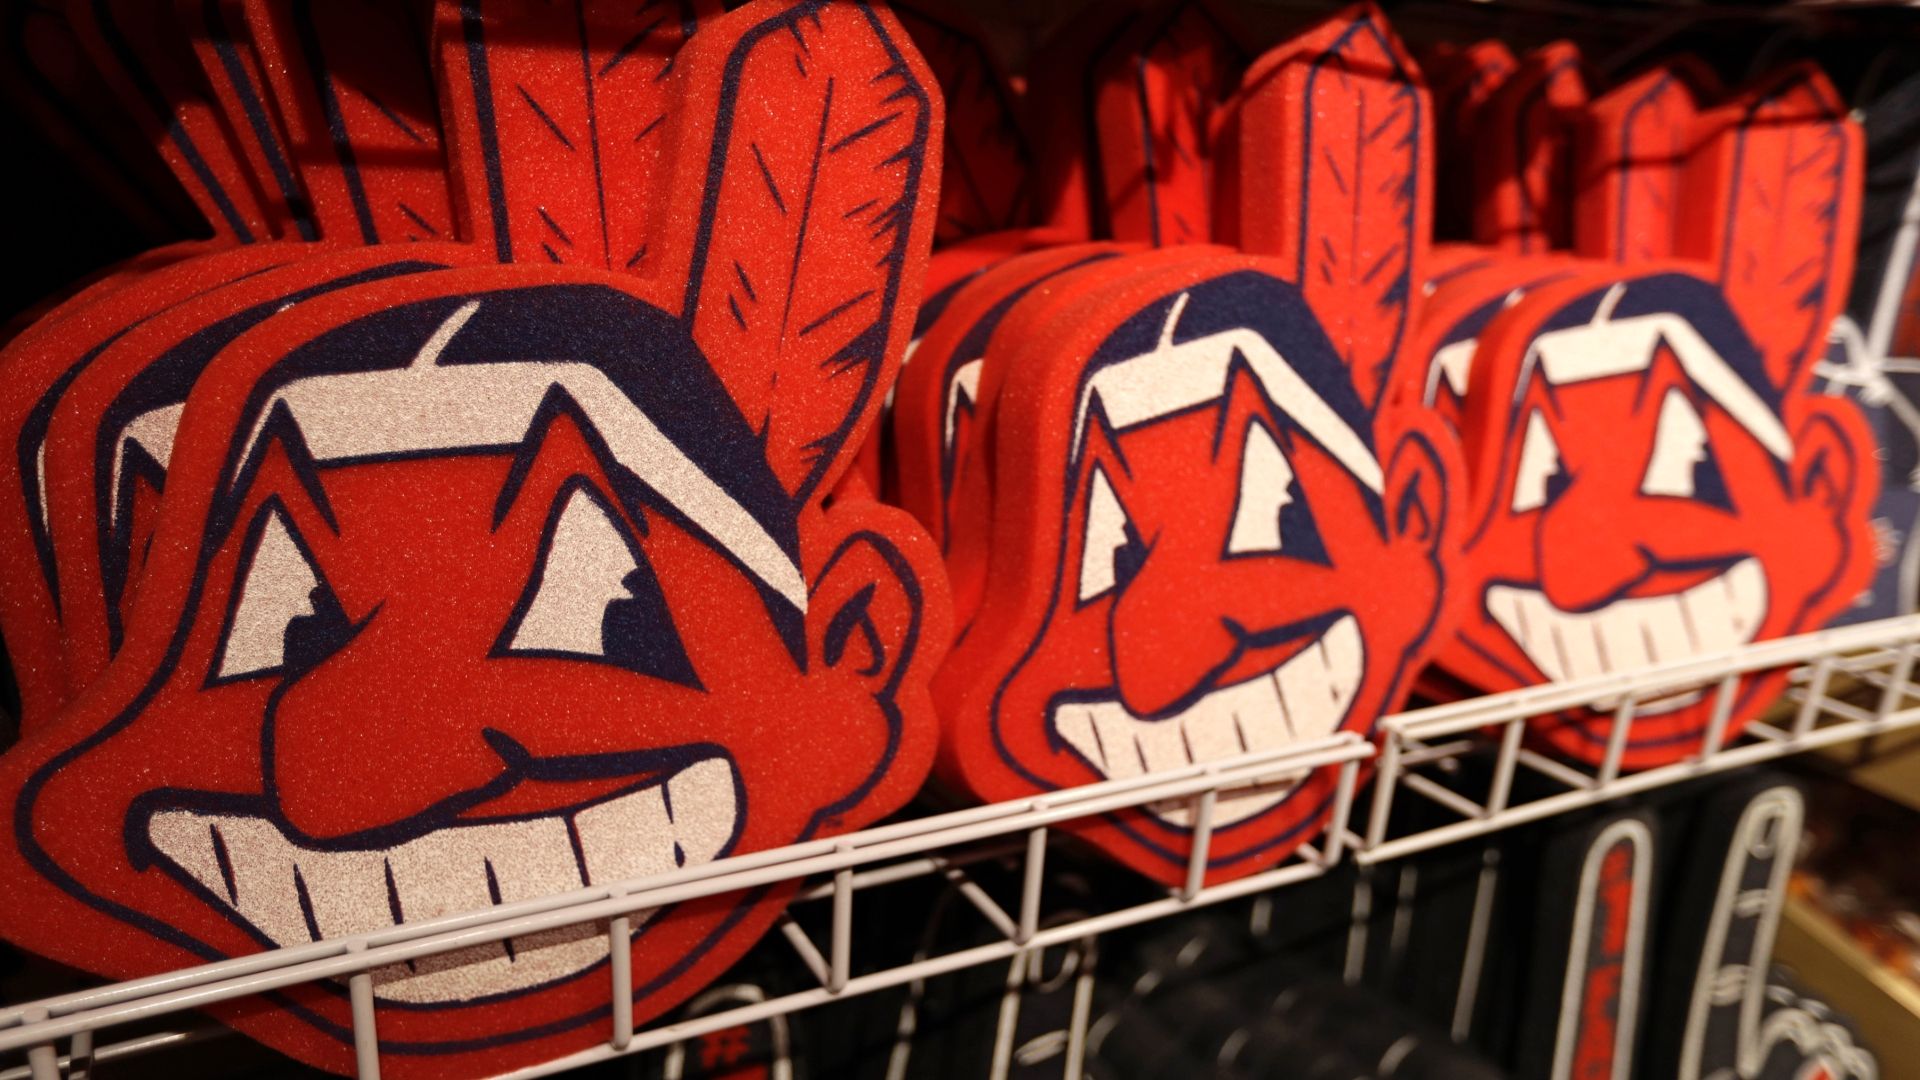 Ejected From the Field, Chief Wahoo's Still A Hot Seller